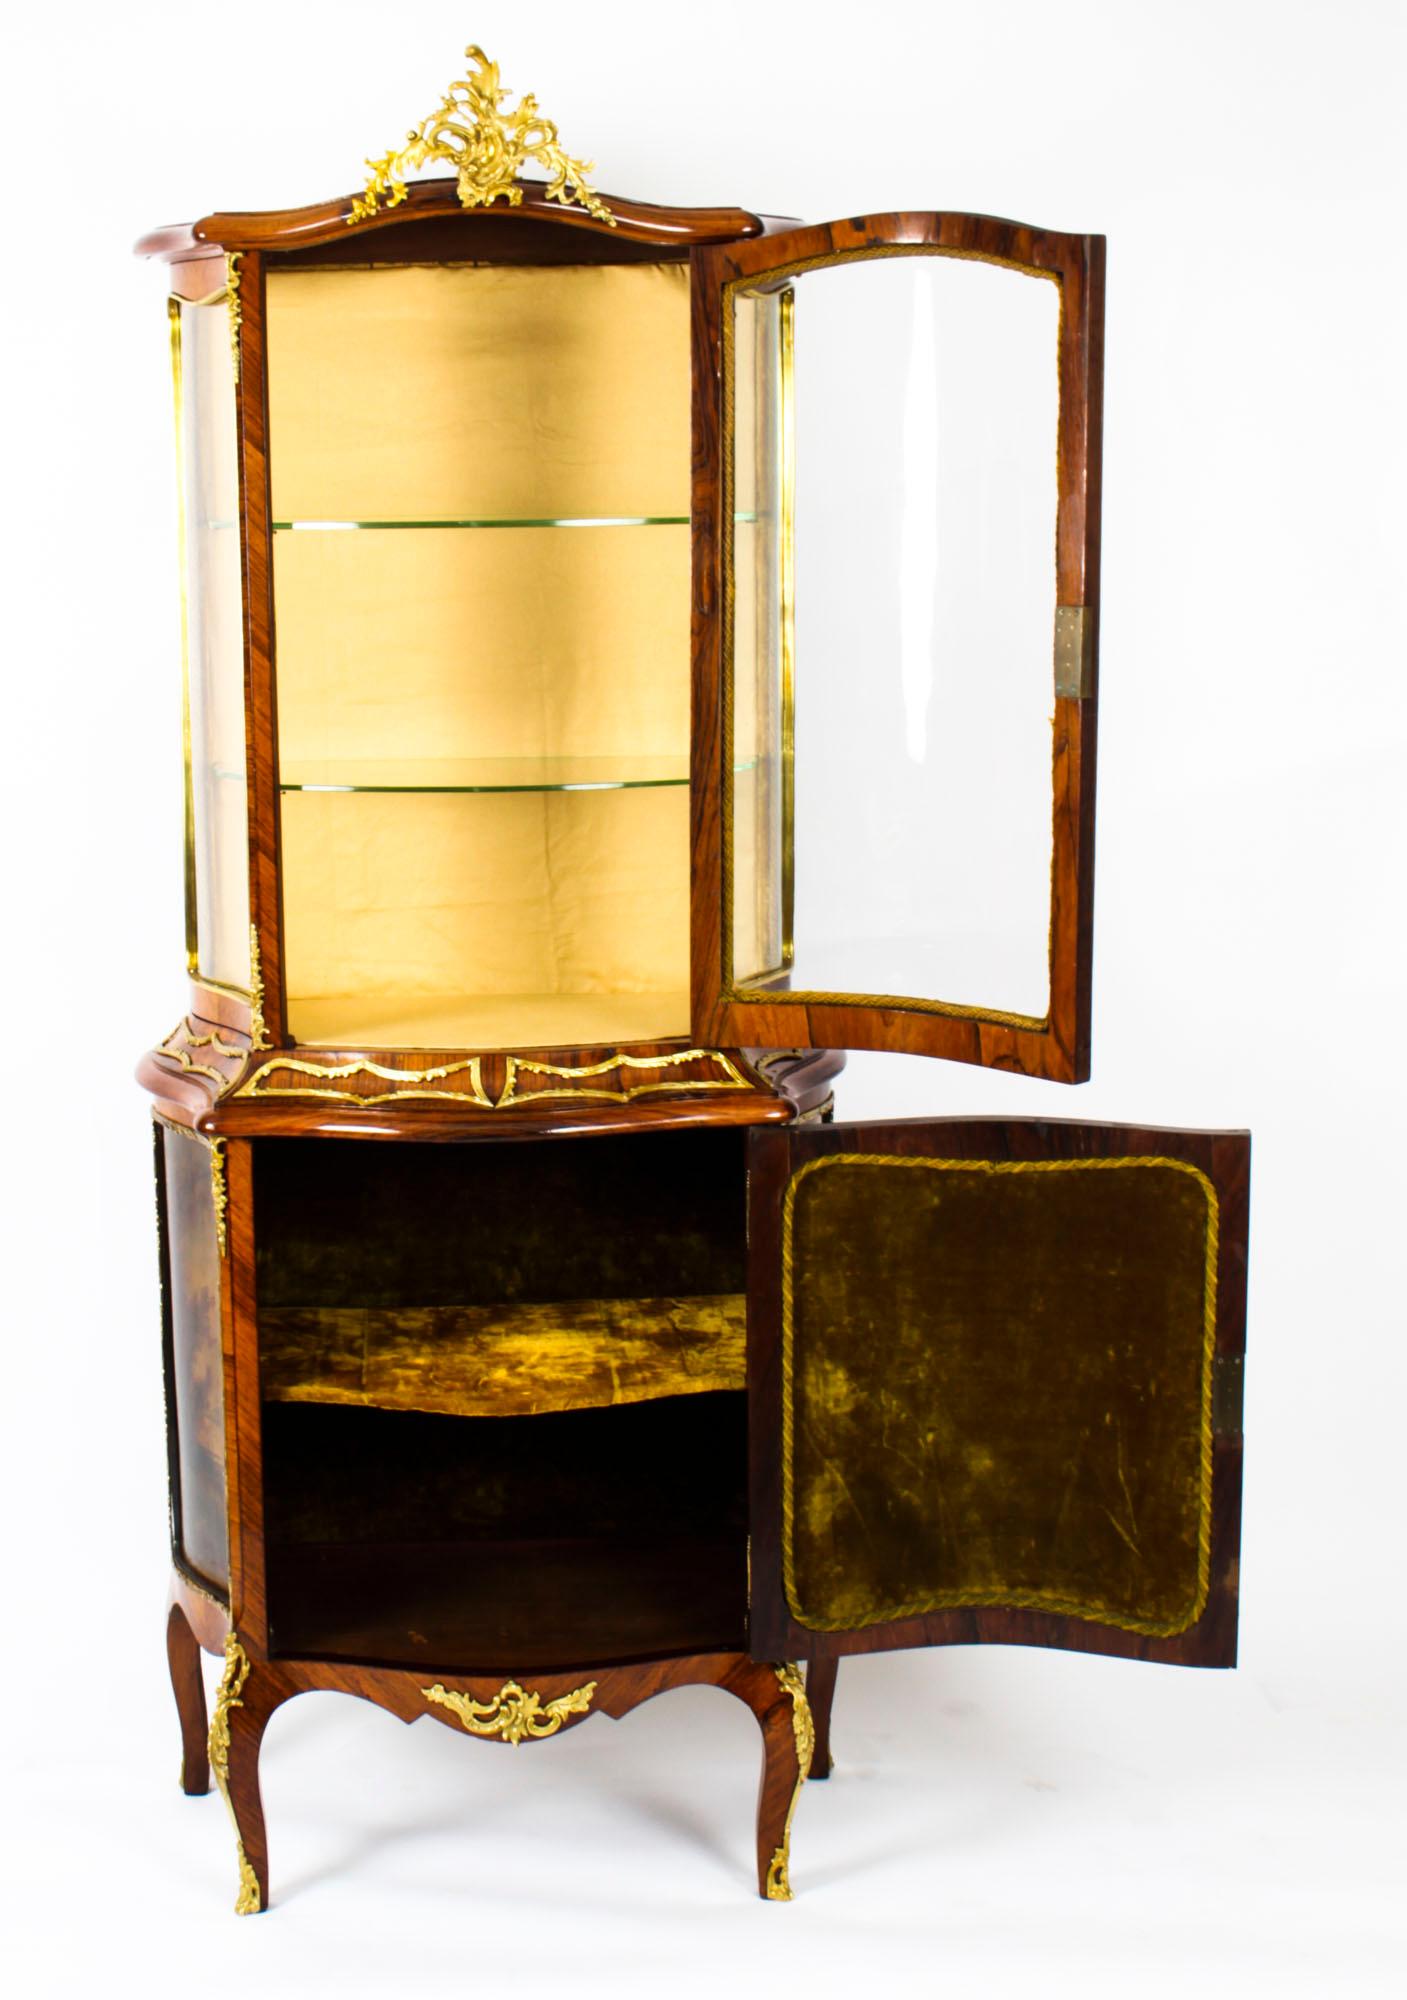 Antique French Transitional Vernis Martin Vitrine Display Cabinet, 19th Century 9